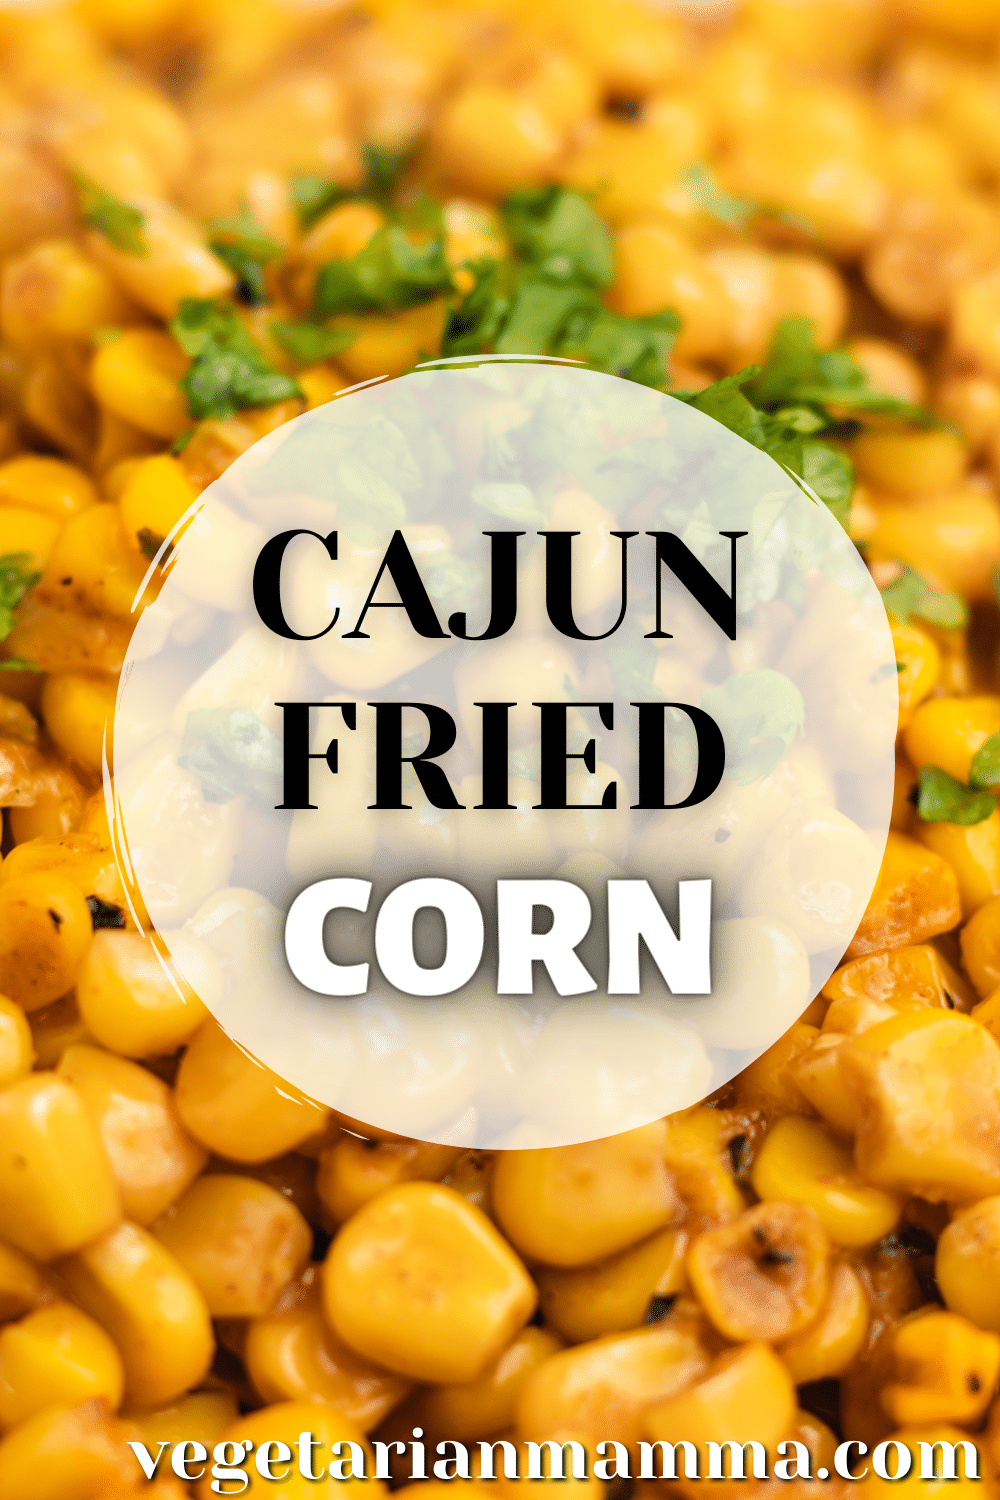 Sweet, spicy, buttery Cajun Fried Corn is super simple to make in just 10 minutes on the stove! Enjoy this easy and delicious Southern side dish with any of your favorite meals.